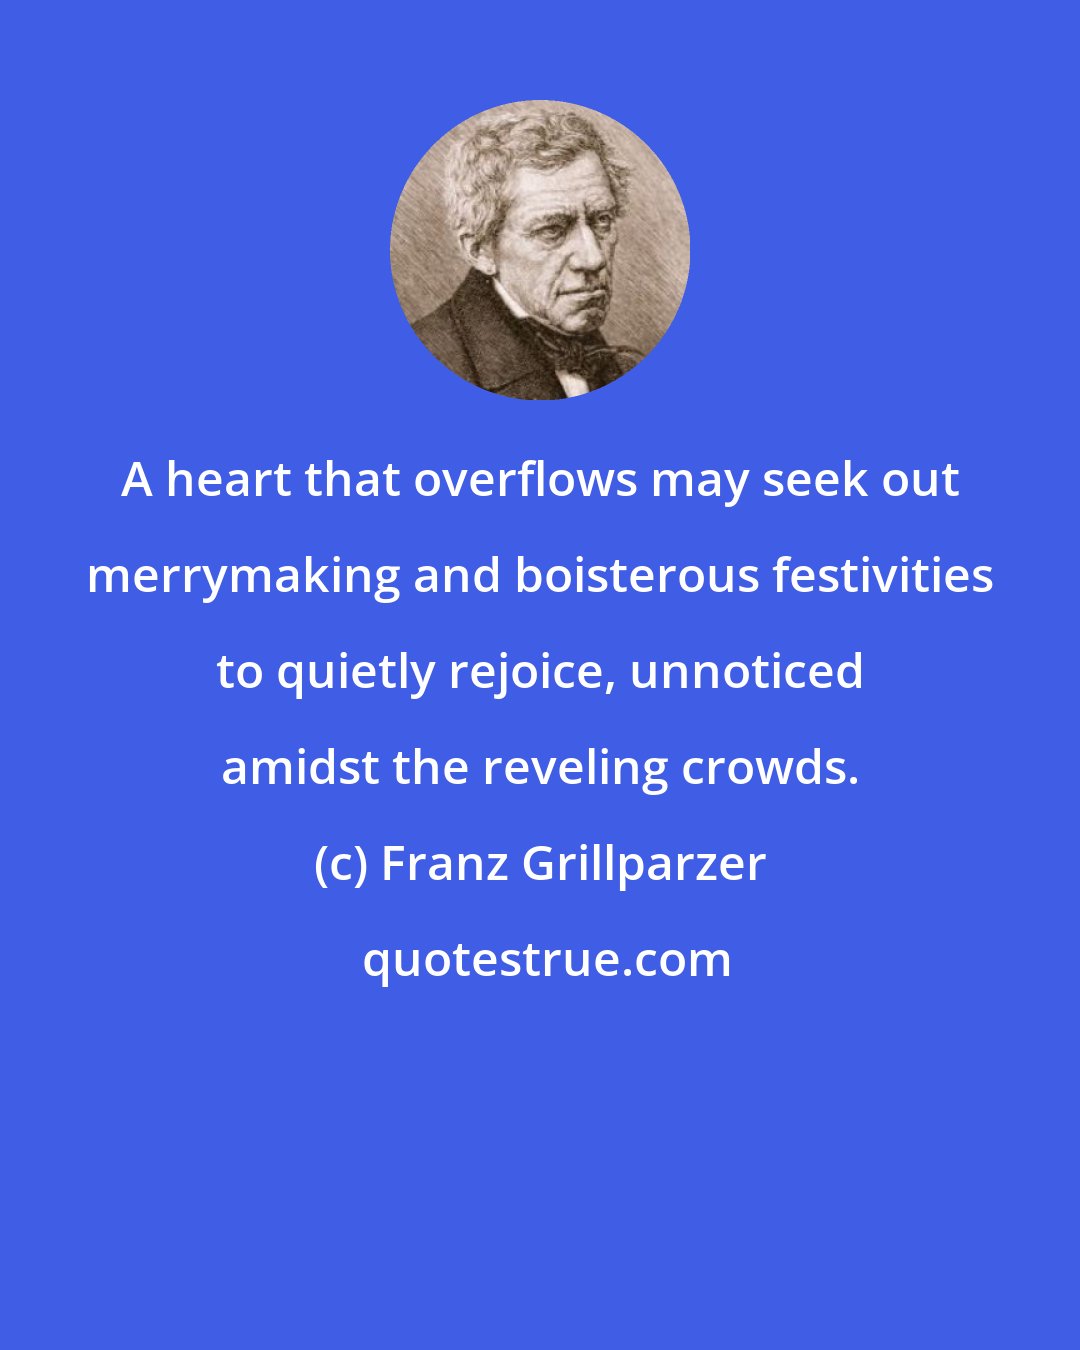 Franz Grillparzer: A heart that overflows may seek out merrymaking and boisterous festivities to quietly rejoice, unnoticed amidst the reveling crowds.